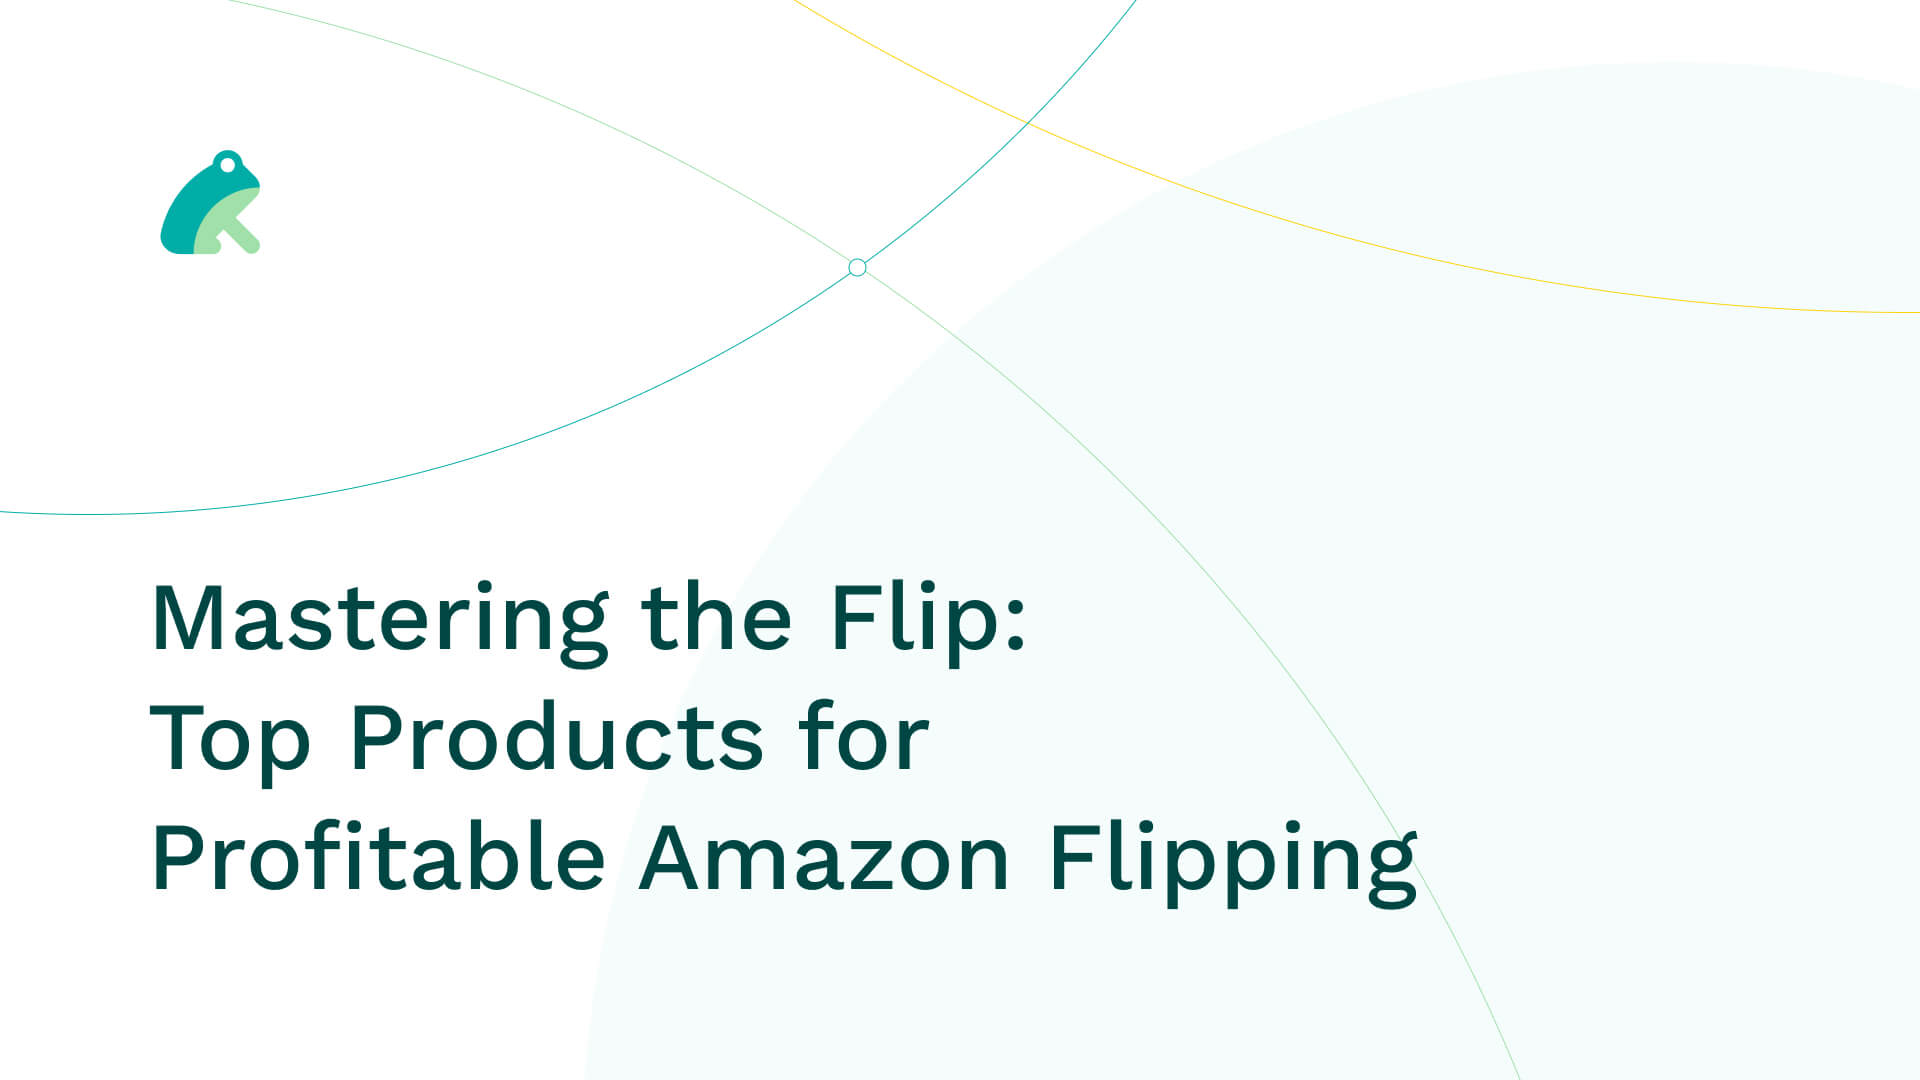 Mastering the Flip: Top Products for Profitable Amazon Flipping